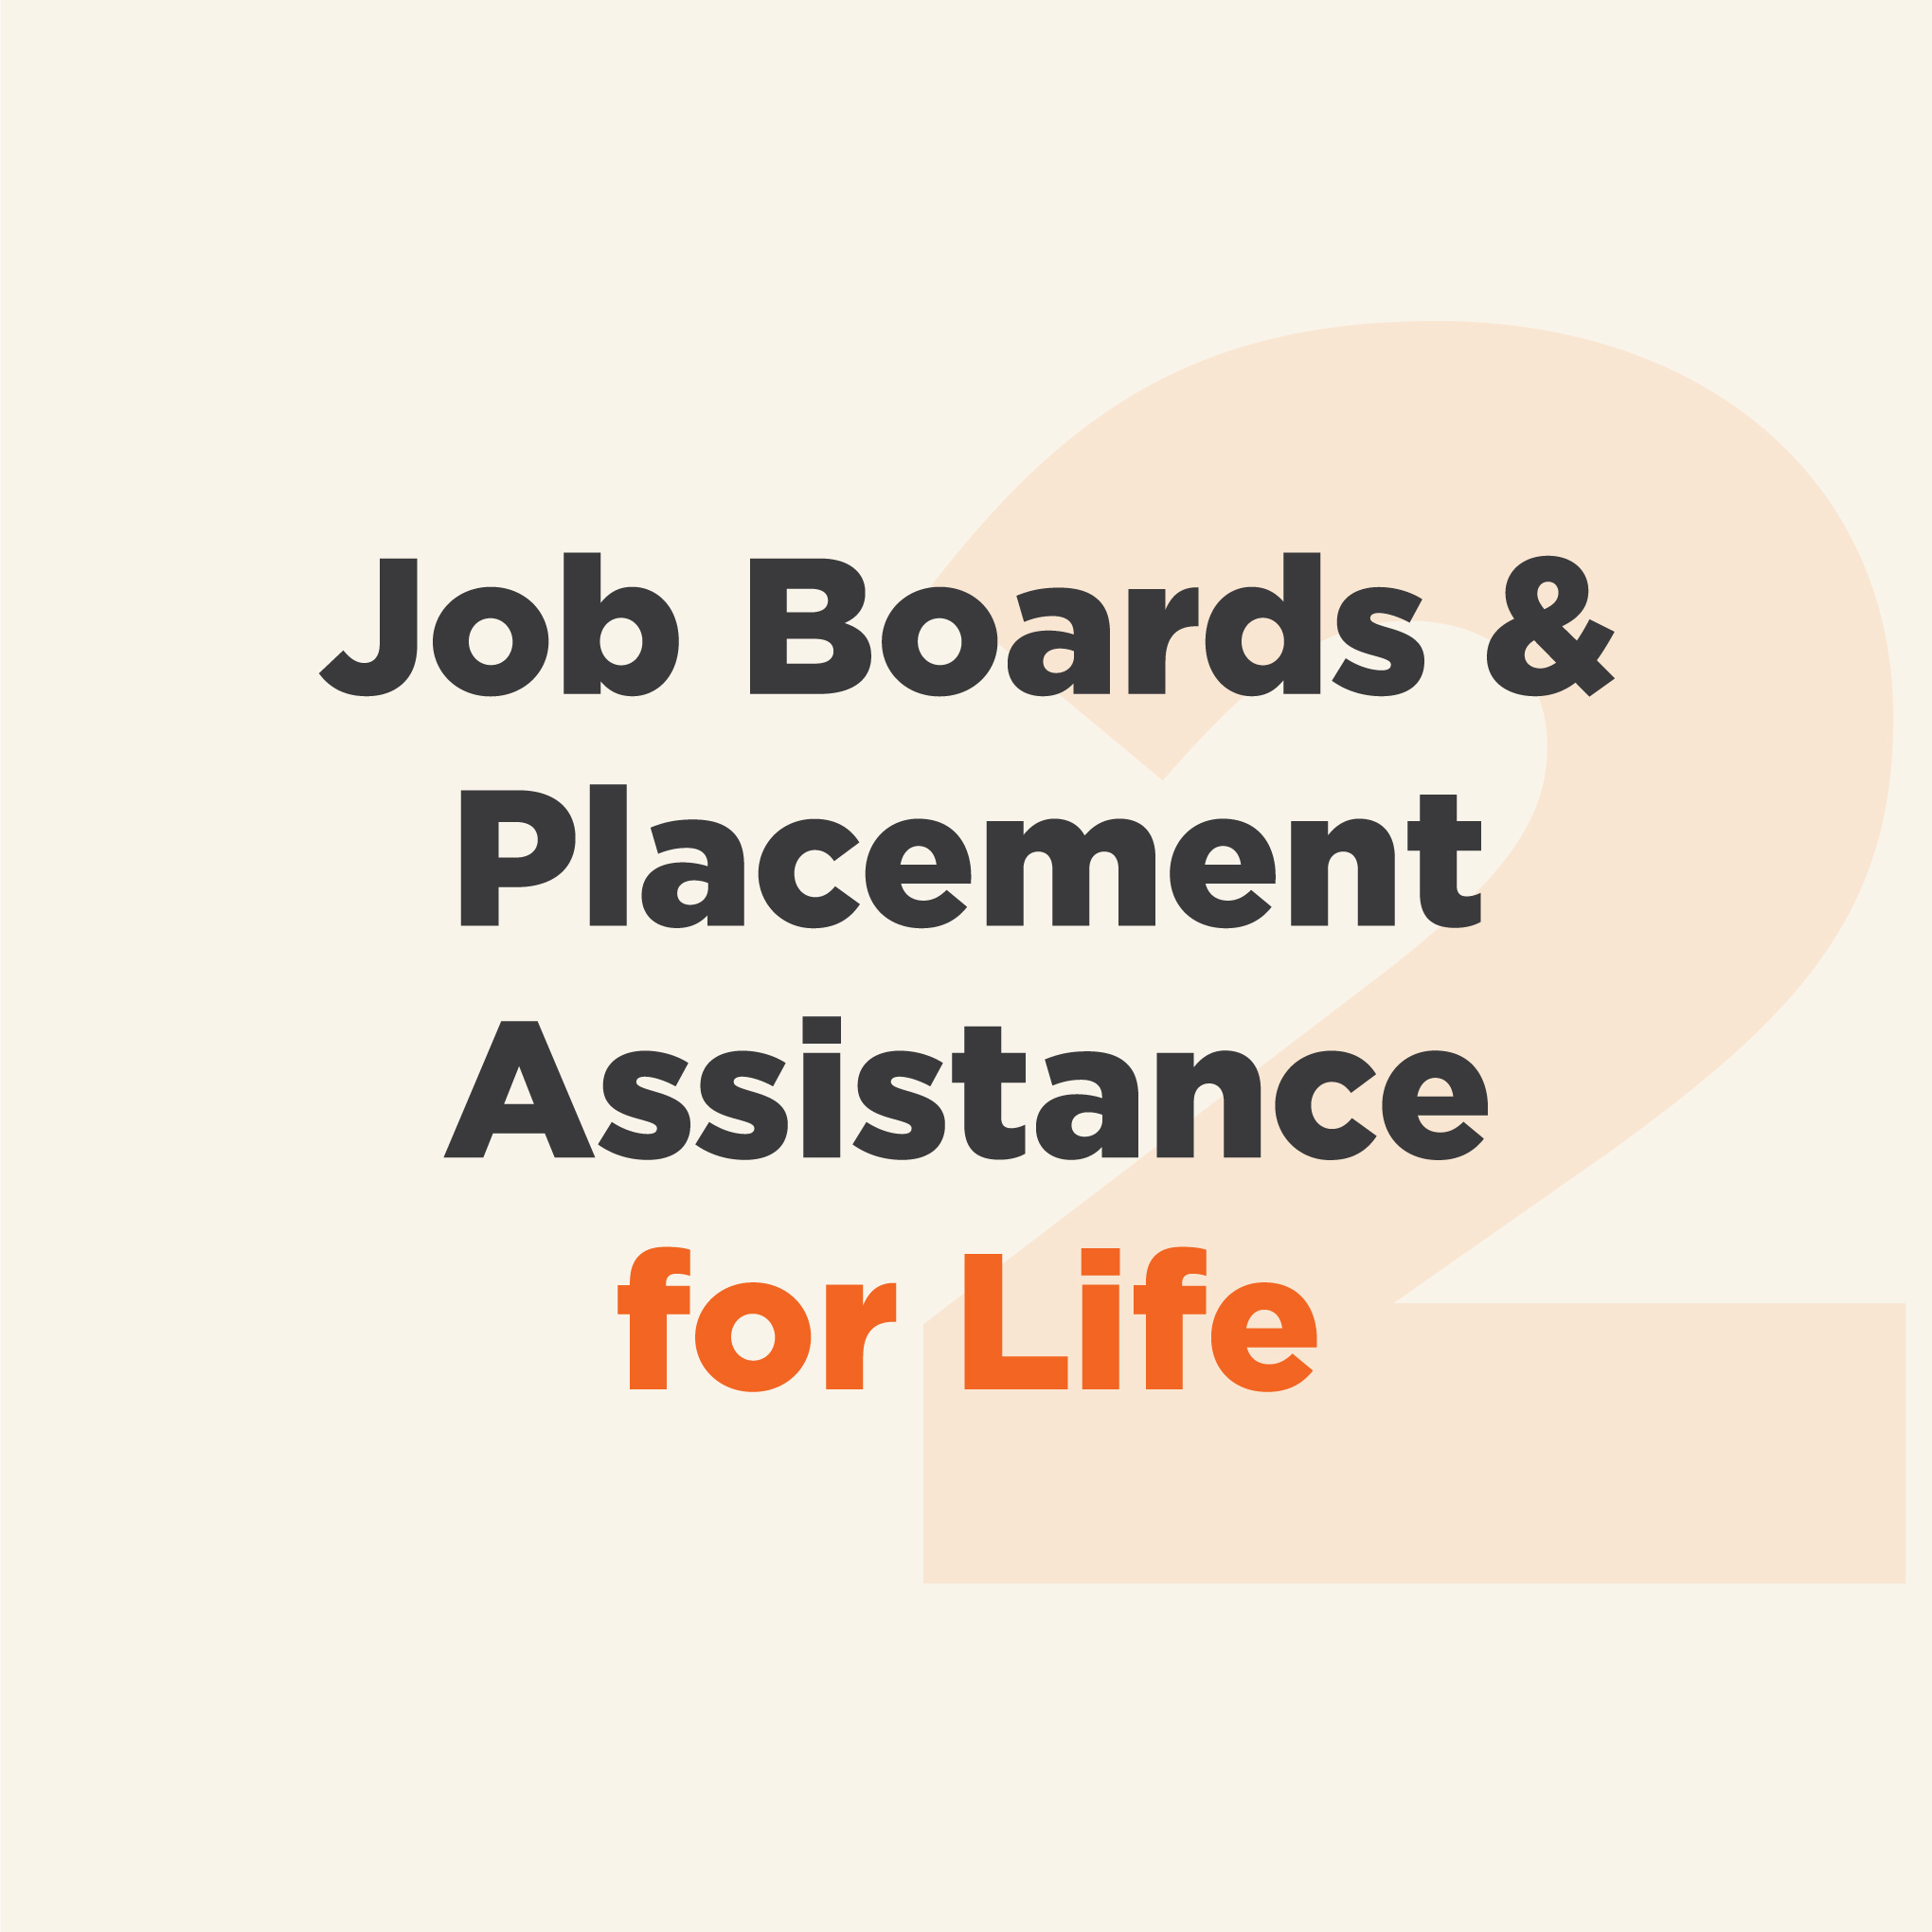 Job Boards & Placement Assistance for Life